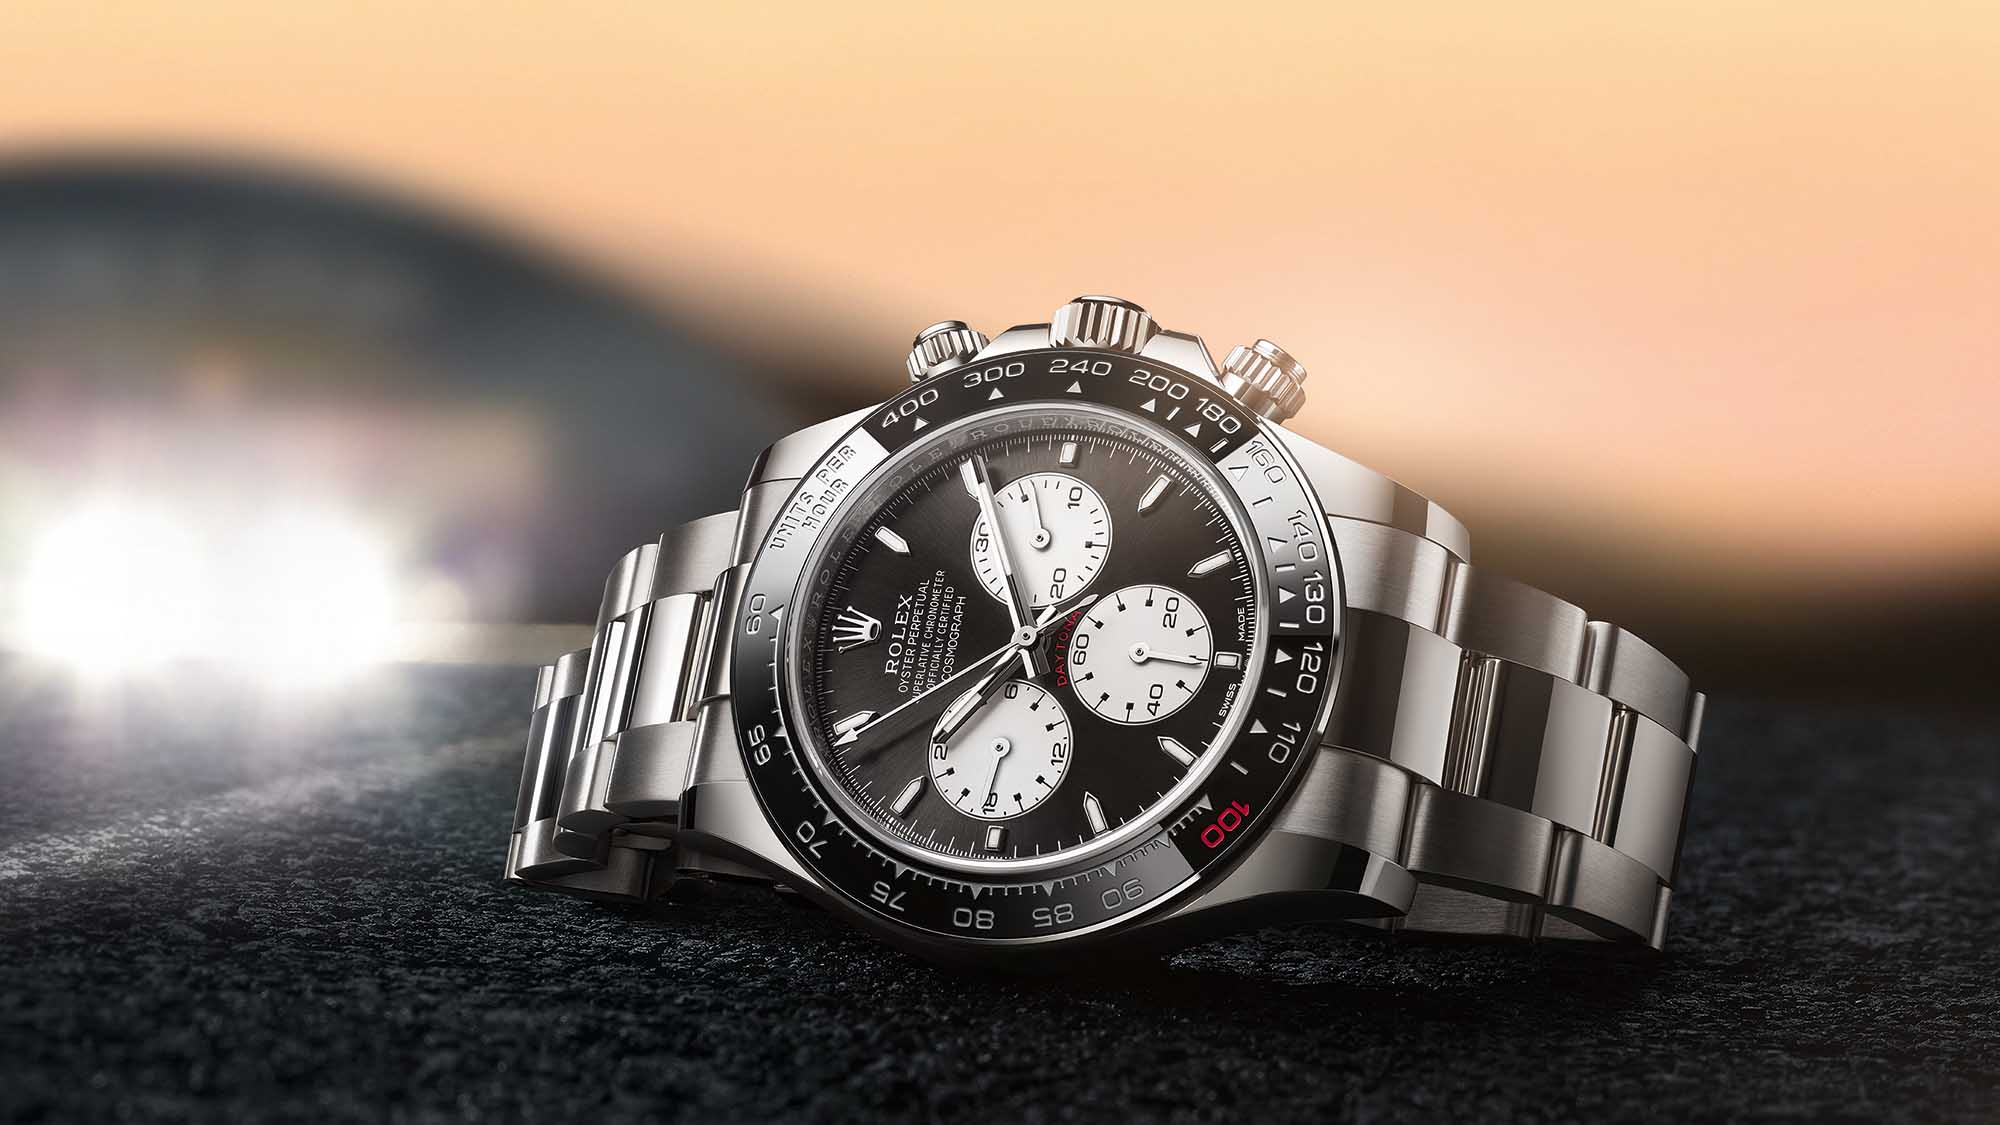 Look: Rolex Revives The Newman' With A New Le Mans-Inspired Cosmograph Daytona Ref. 126529LN Watch | aBlogtoWatch